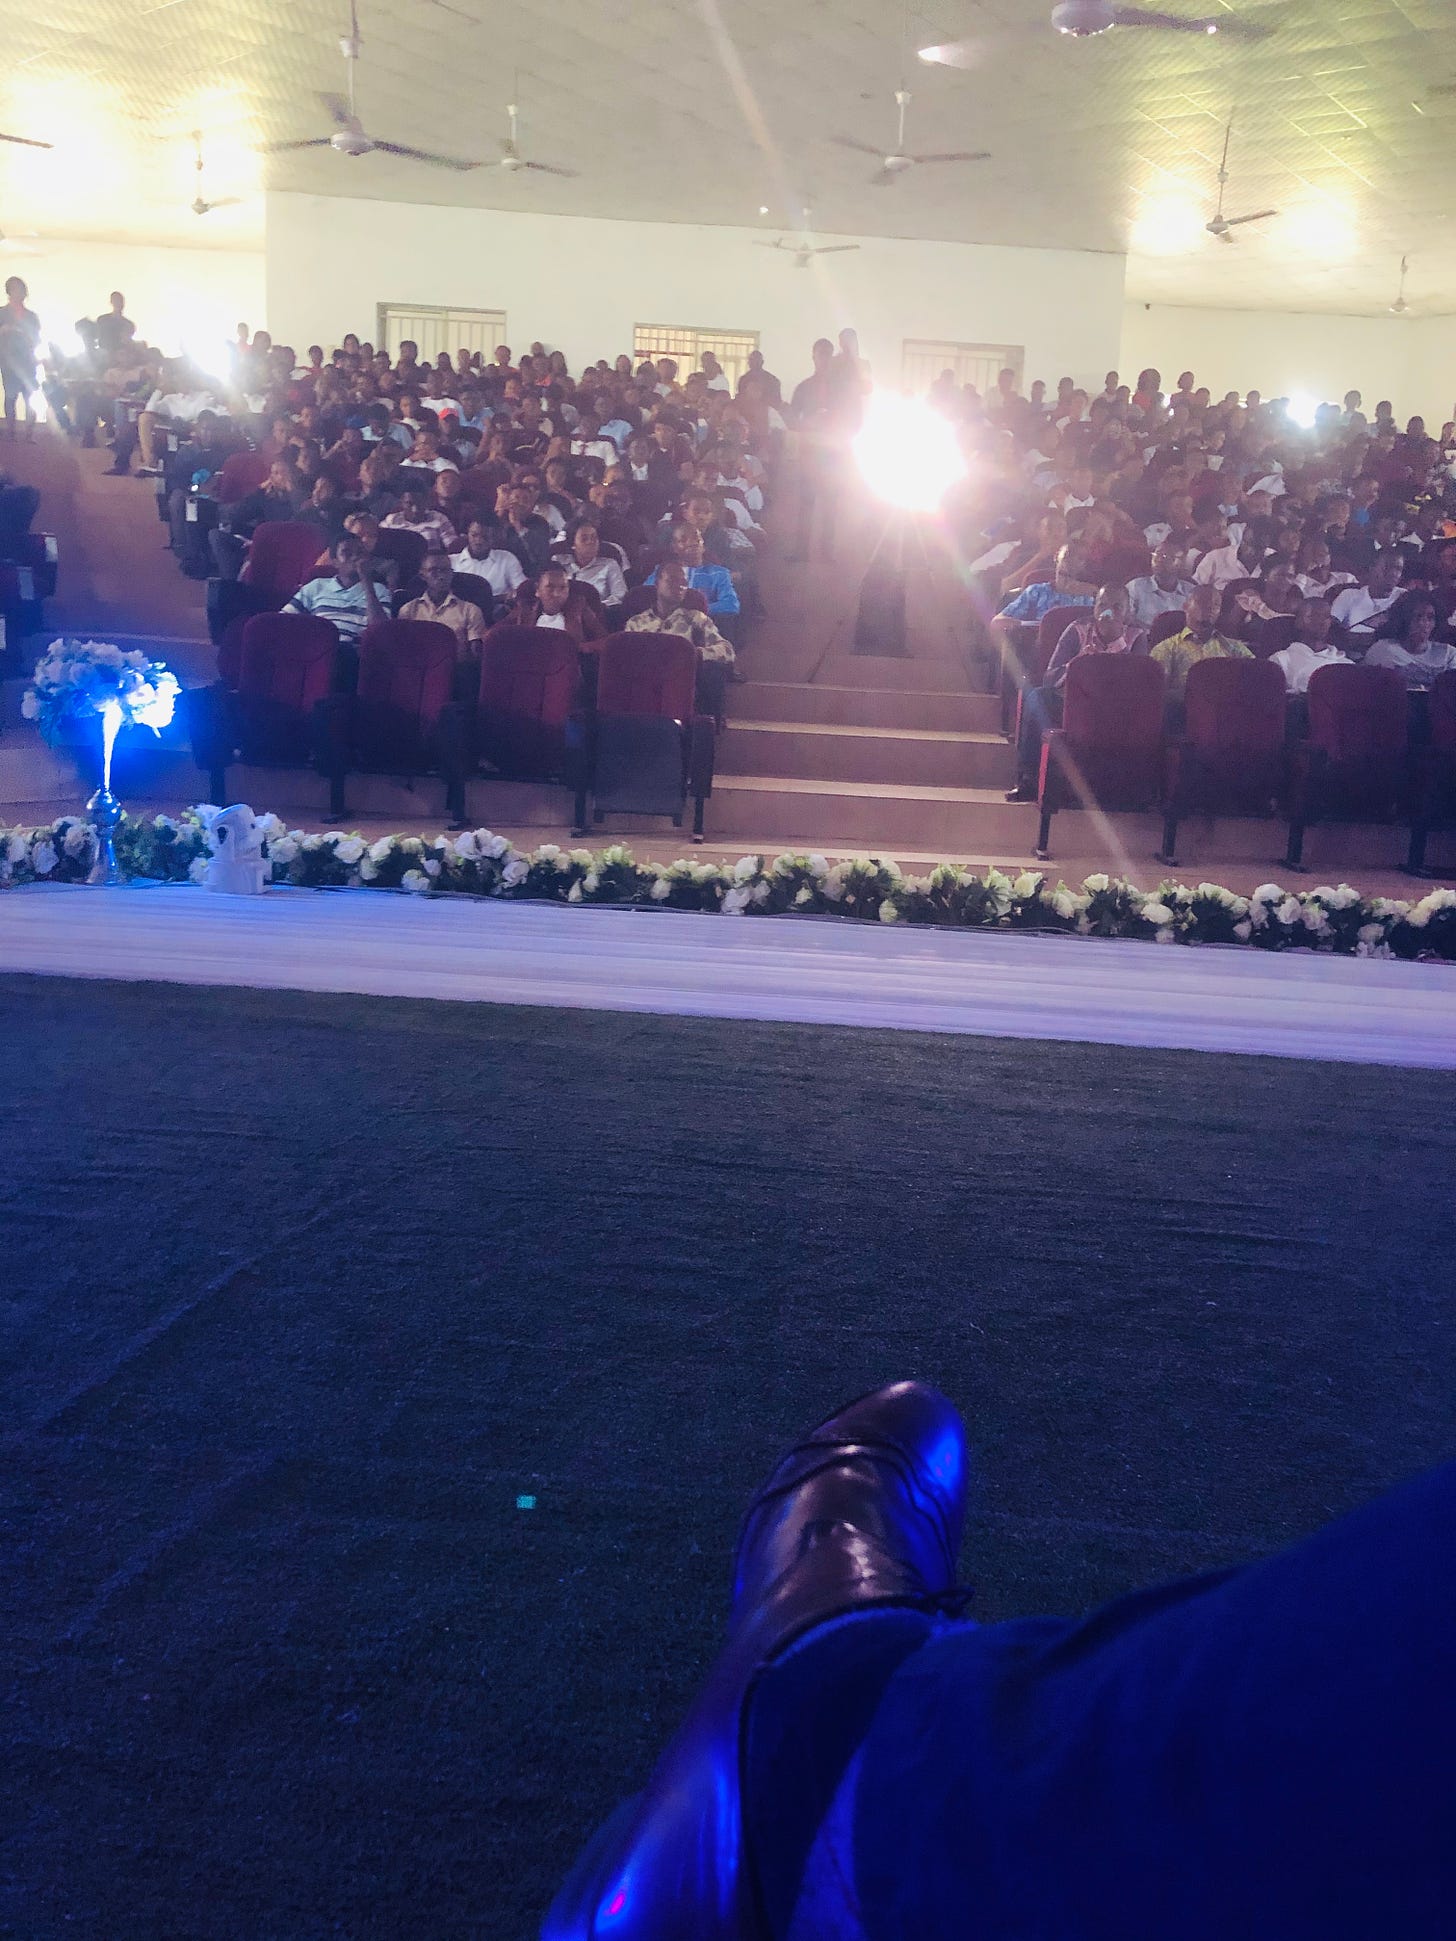 Speaking to the Final year students of FUTO Nigeria